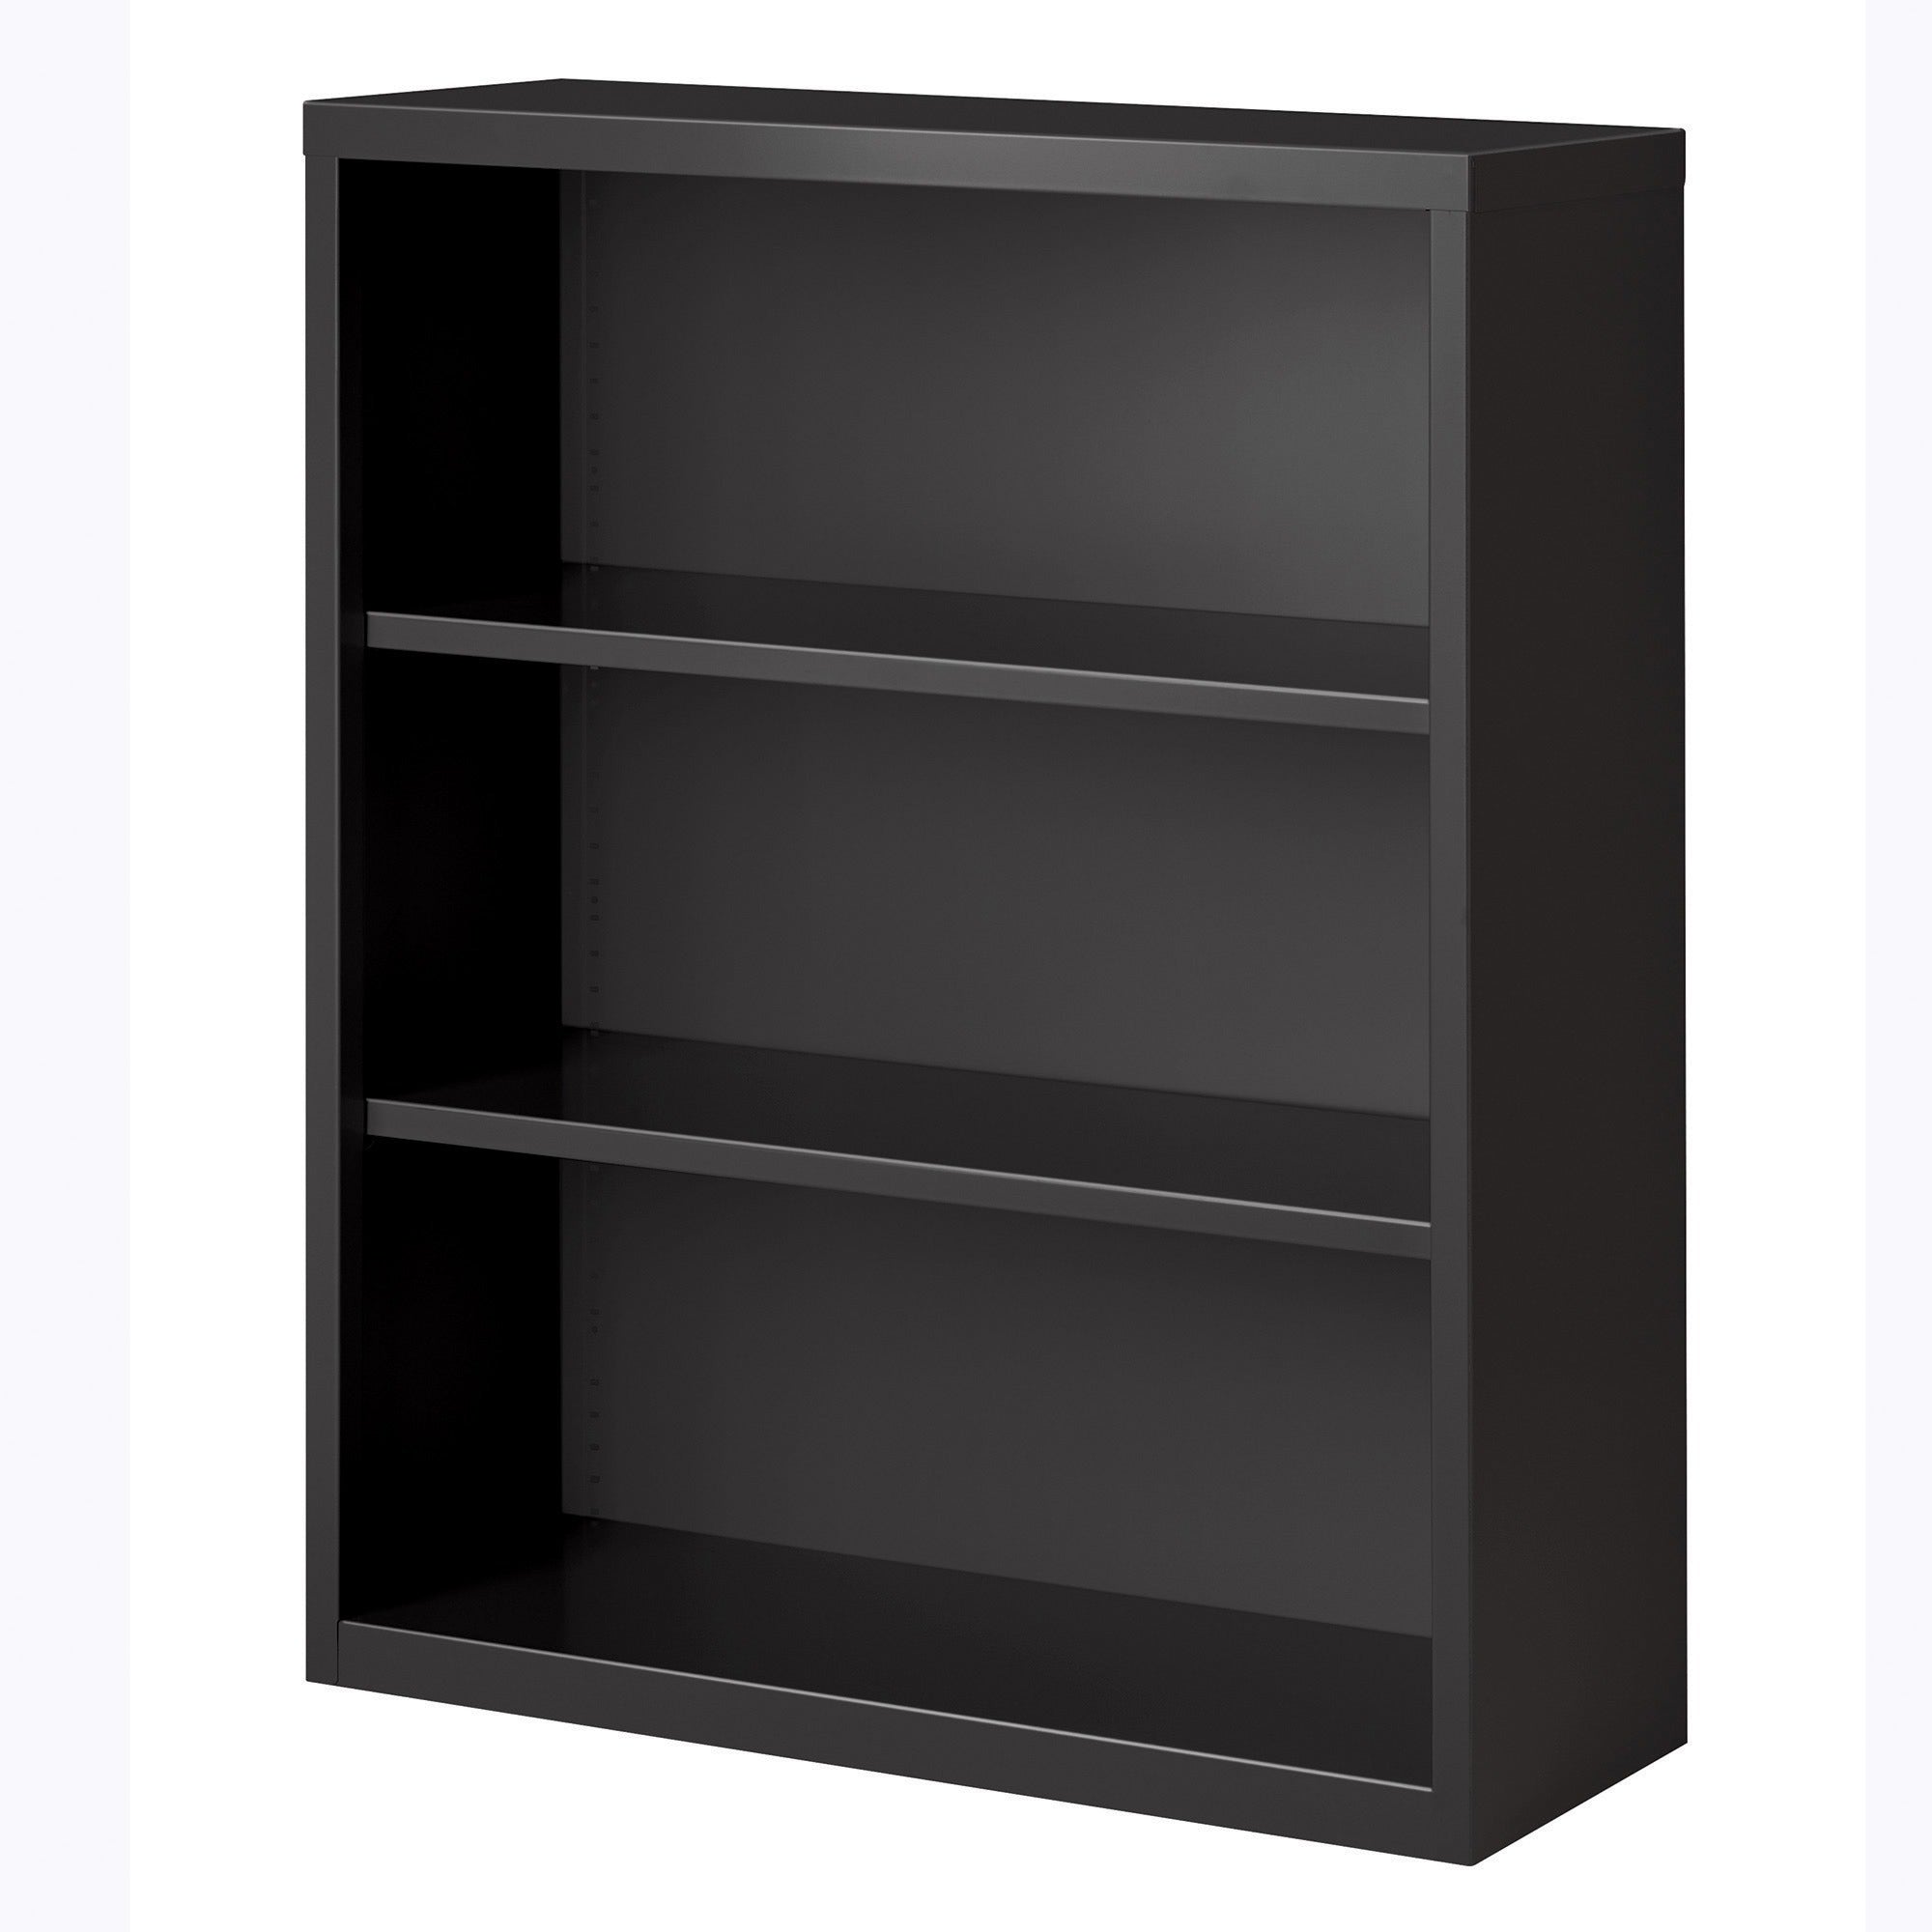 lorell-fortress-series-bookcase-345-x-1342-3-shelves-material-steel-finish-charcoal-powder-coated-adjustable-shelf-welded-durable_llr59692 - 3